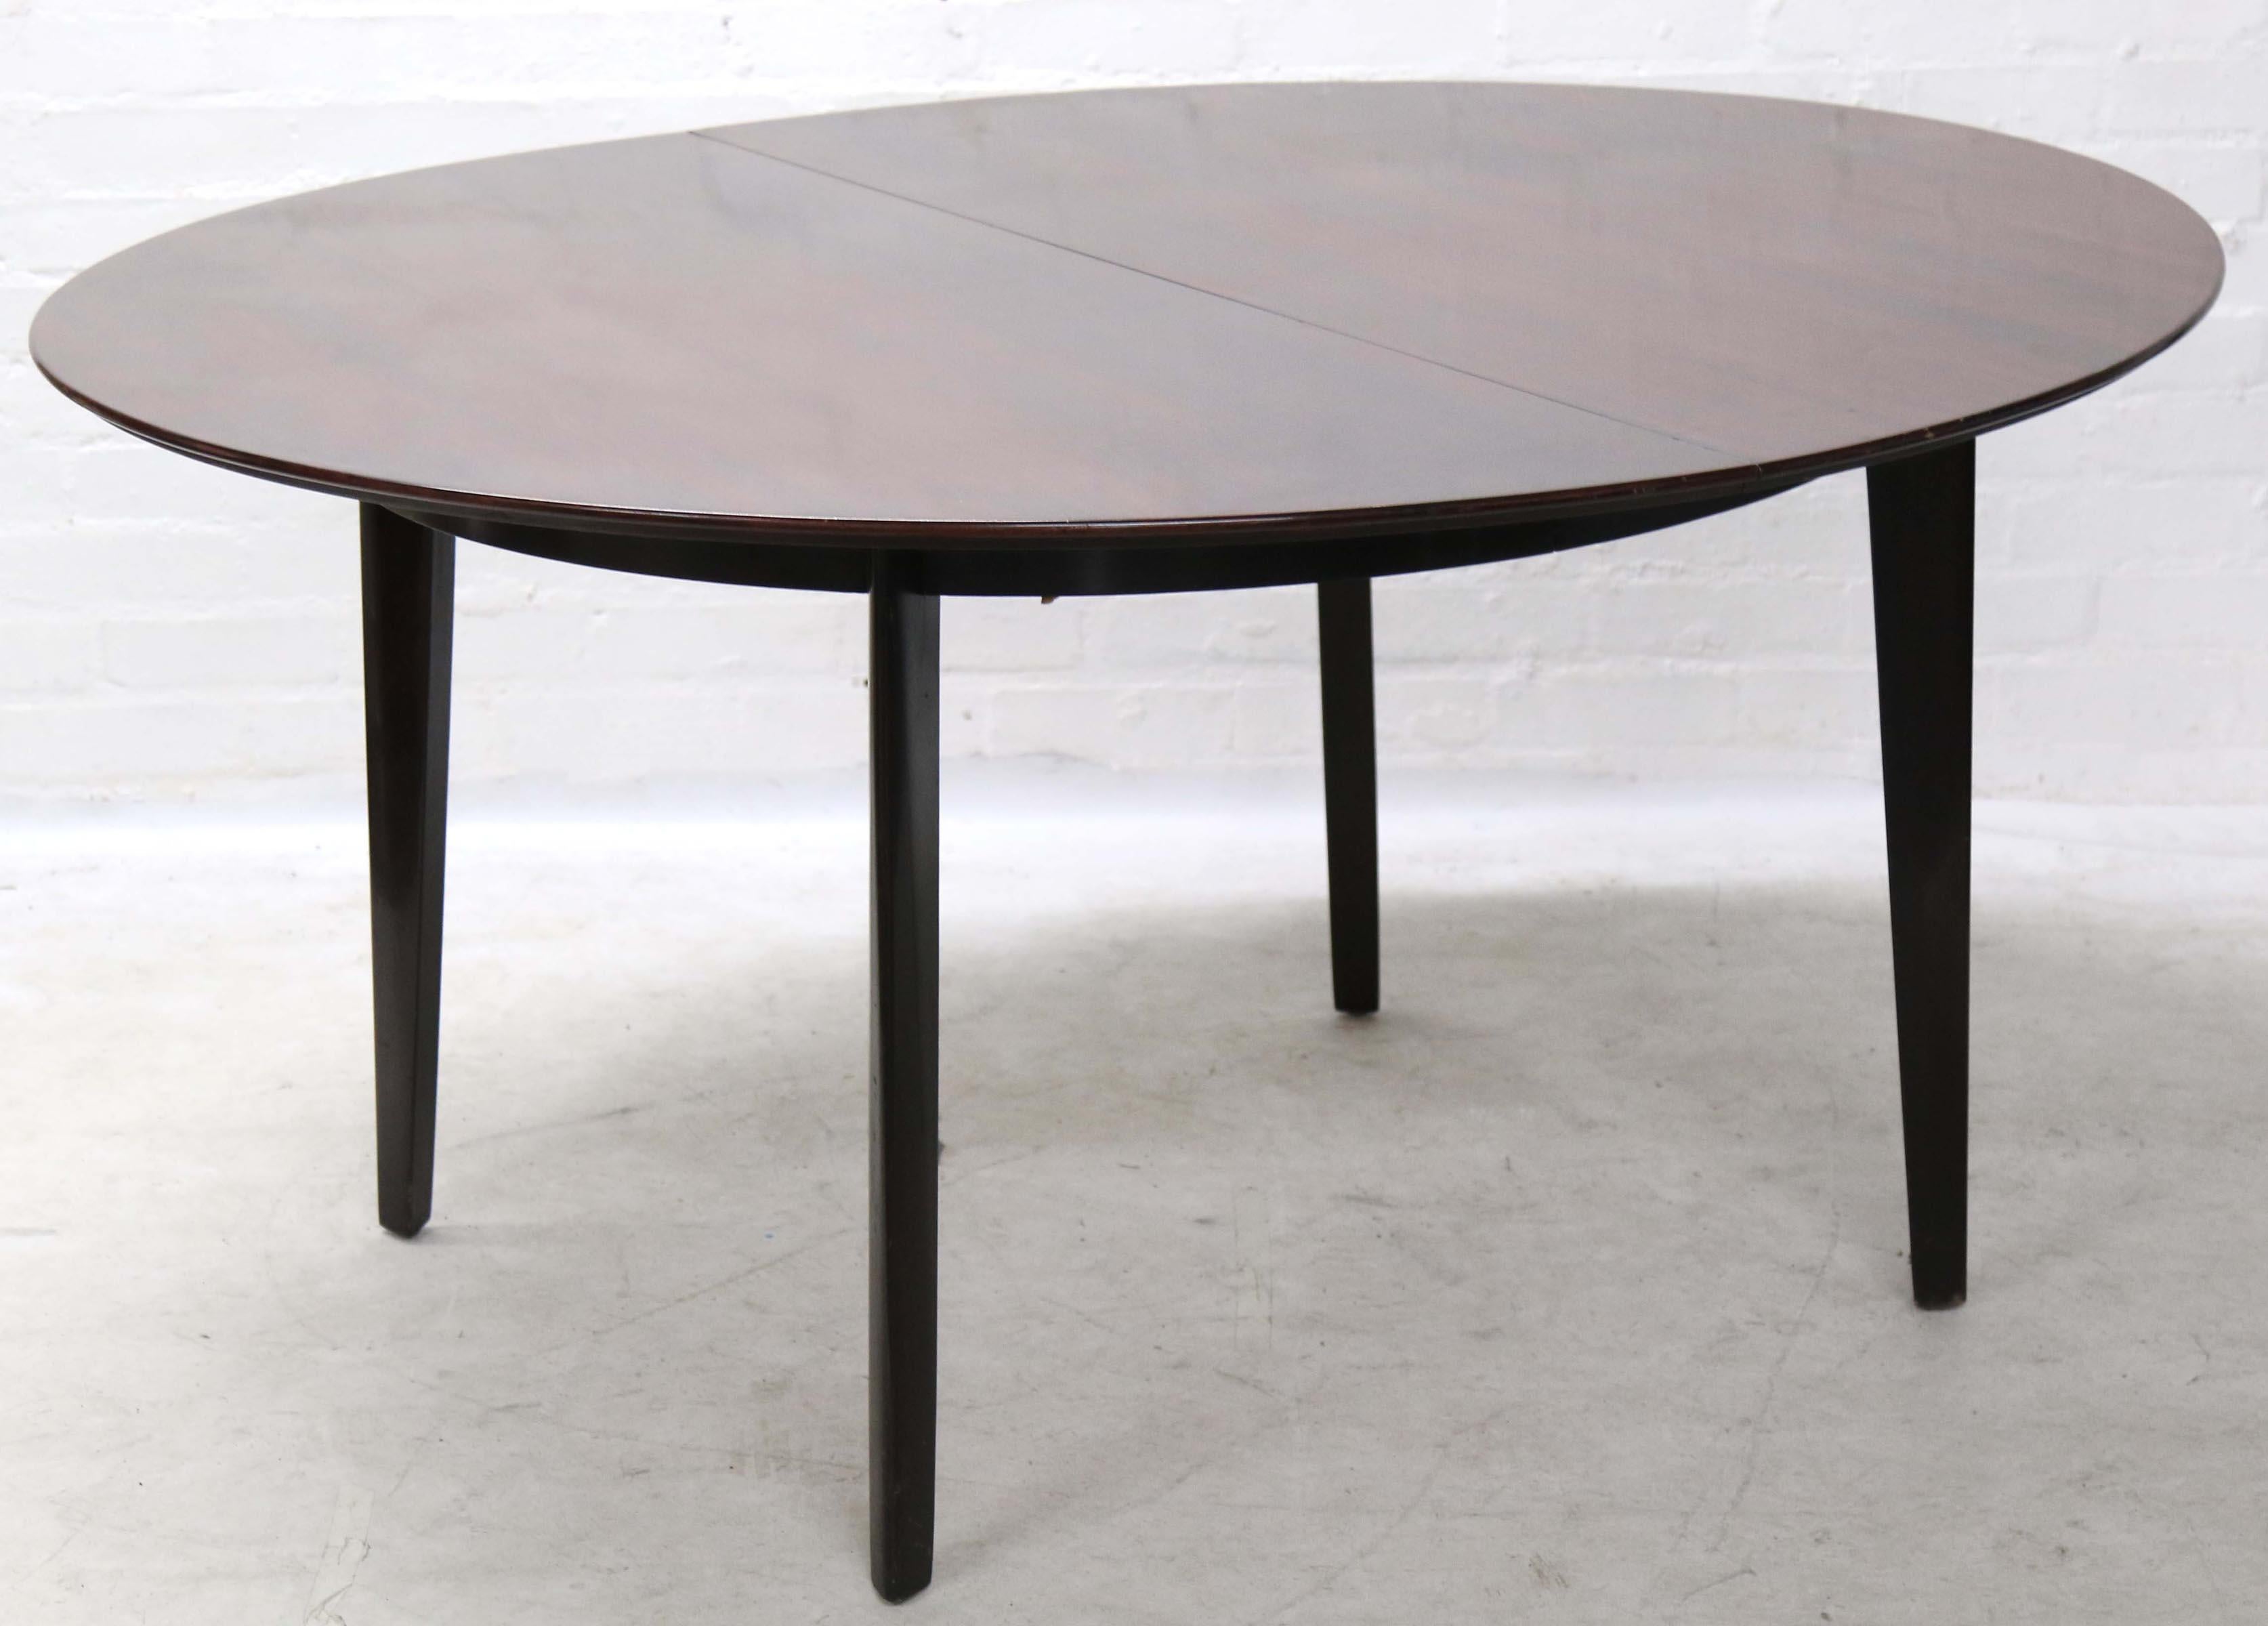 Walnut Edward Wormley Dining Table and Four Chairs by Dunbar Owned Noel Gallagher Oasis